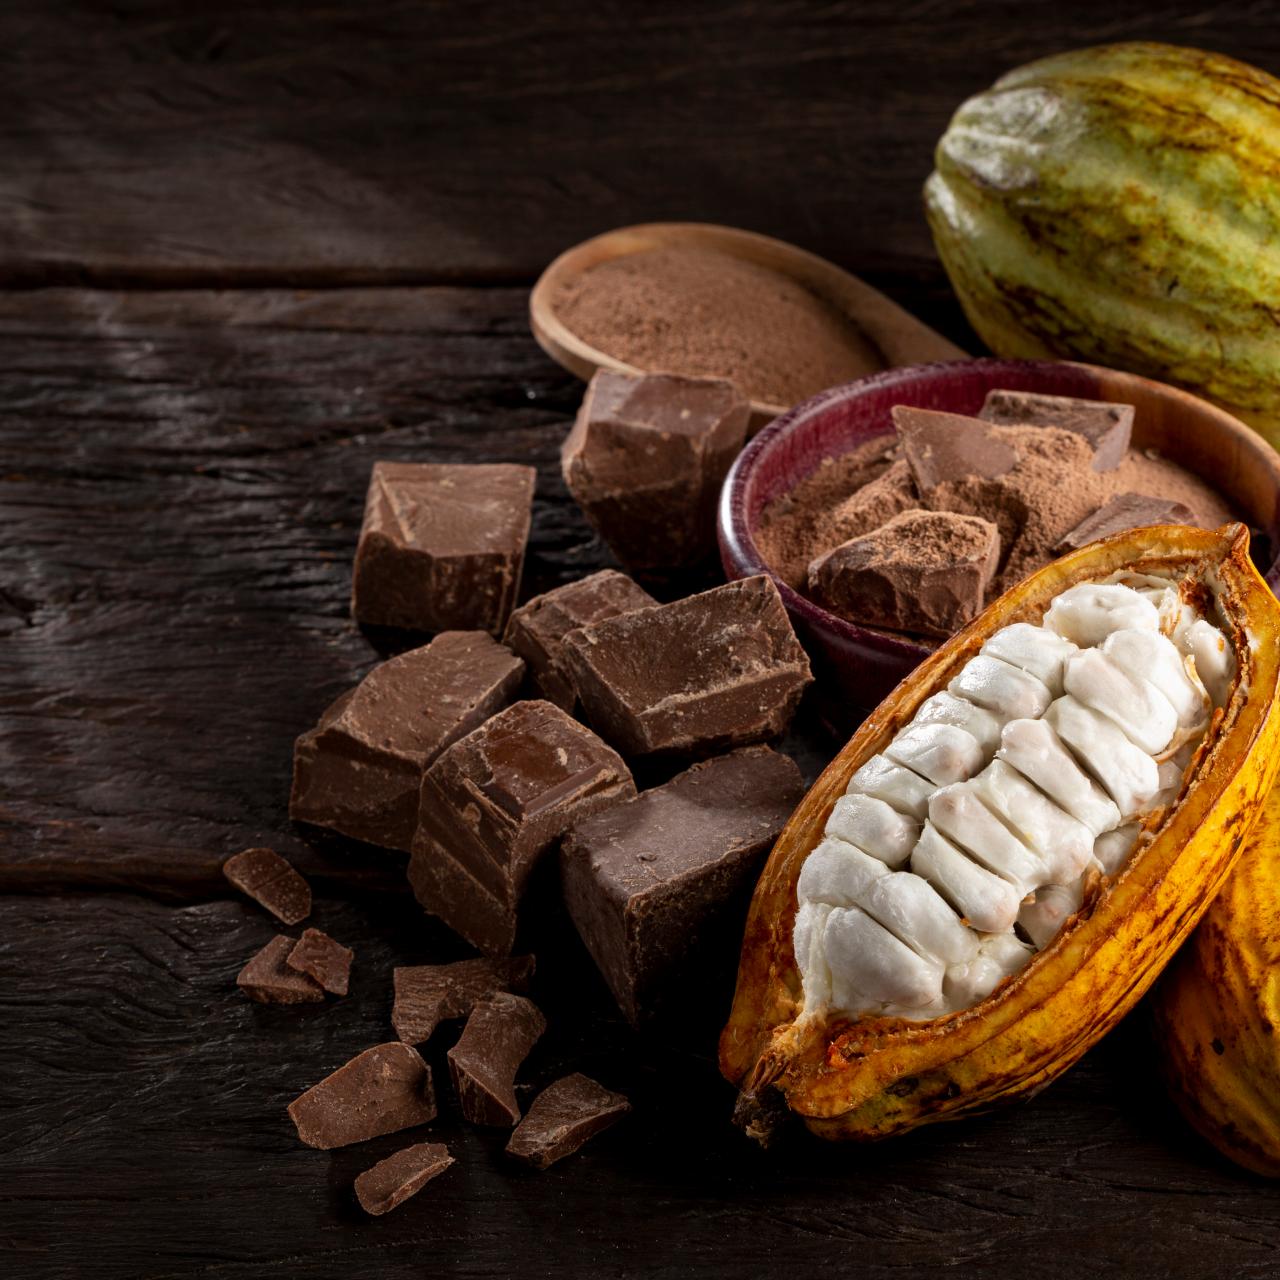 https://food.fnr.sndimg.com/content/dam/images/food/fullset/2023/2/16/cacao-pod-split-open-and%20whole-with-chocolate-and-chocolate-powder-on-wood-background.jpg.rend.hgtvcom.1280.1280.suffix/1676555197113.jpeg